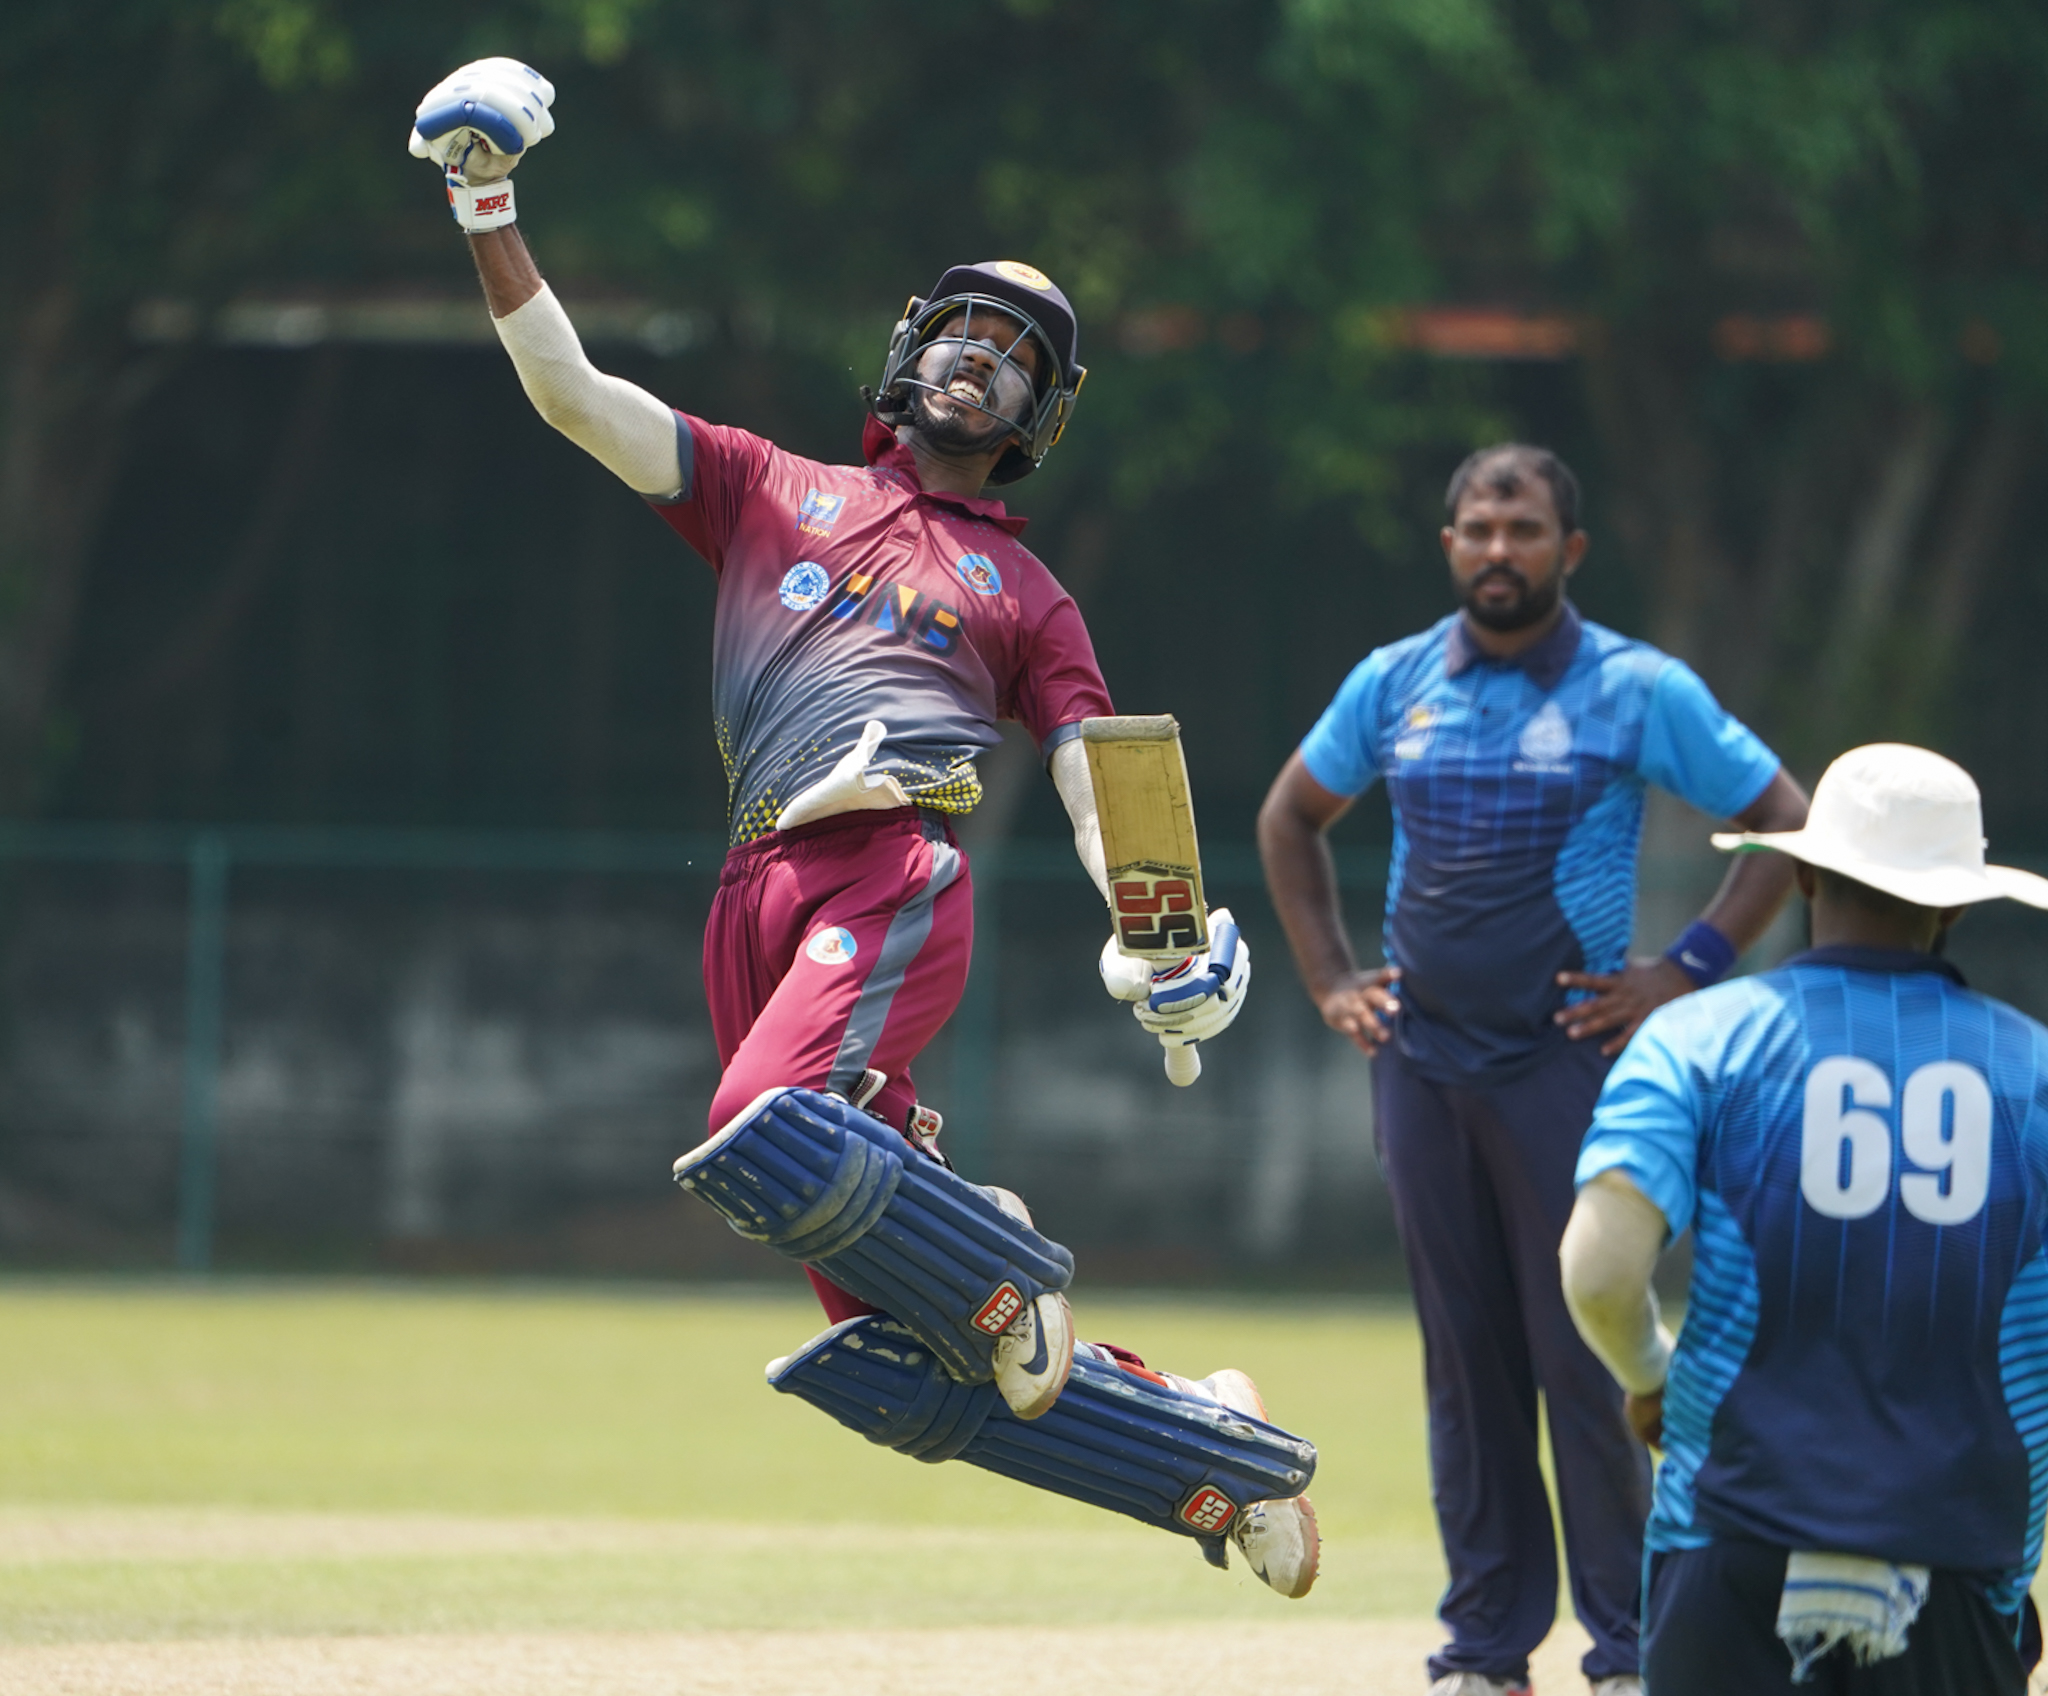 ‘My Cricket Dream is to make it to the Sri Lanka team’ KAMIL MISHARA, PLAYER OF FINAL SAYS